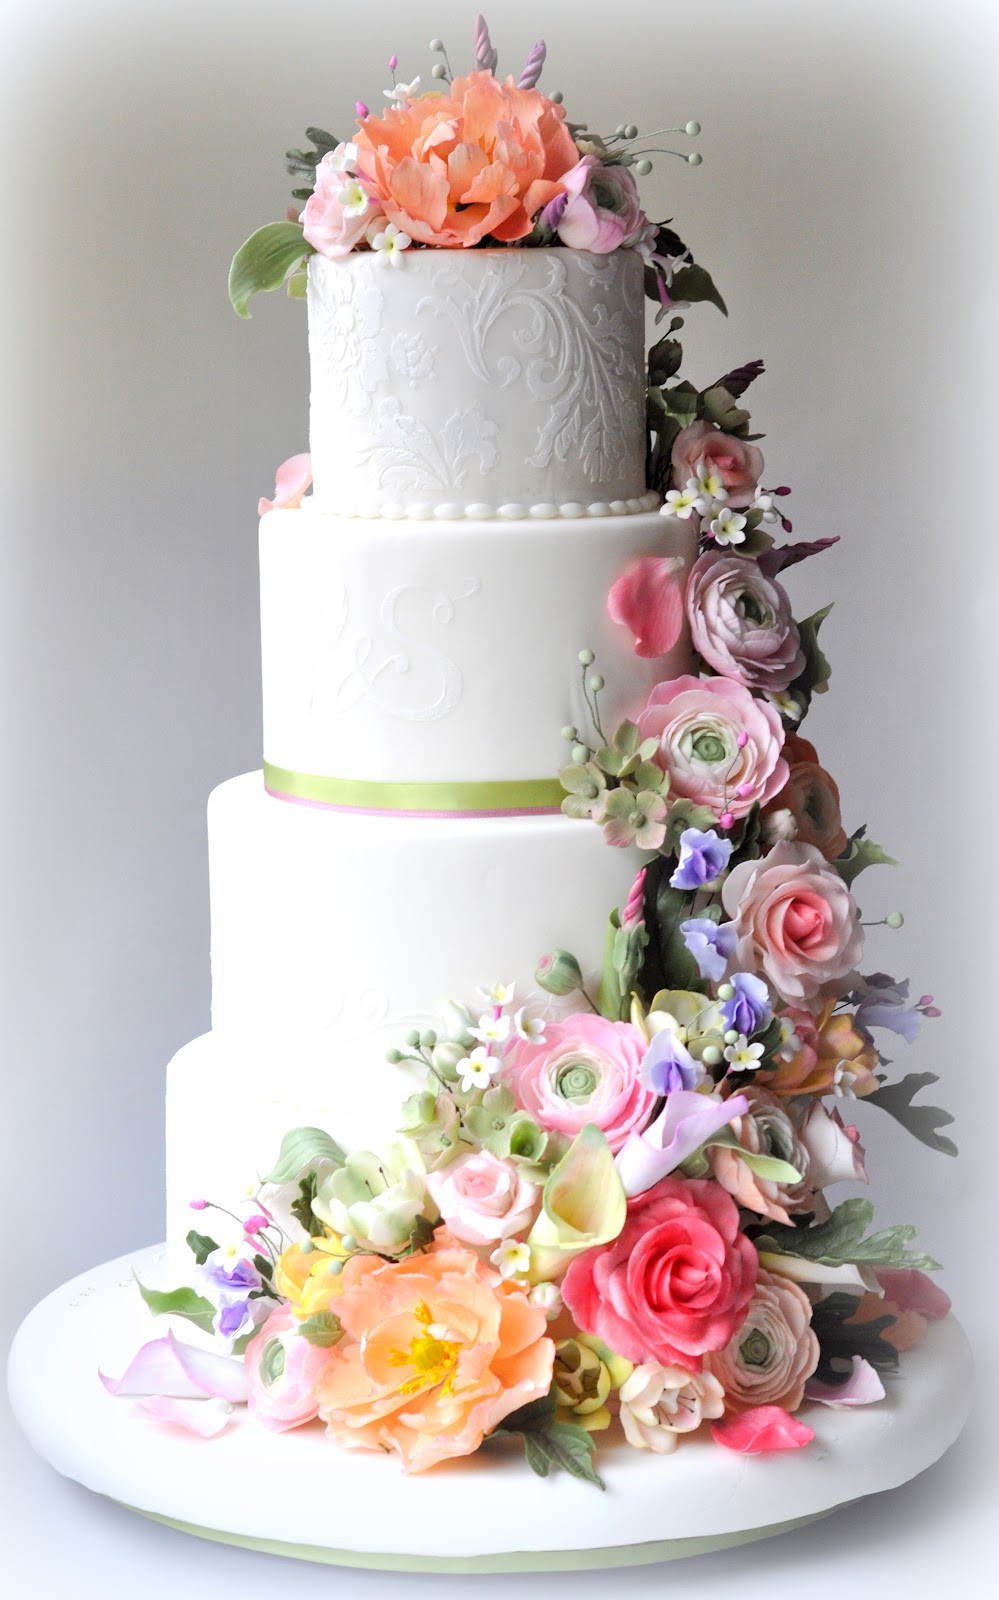 Roses Wedding Cakes
 7 Gorgeous Reasons to Fall in Love With Spring Weddings